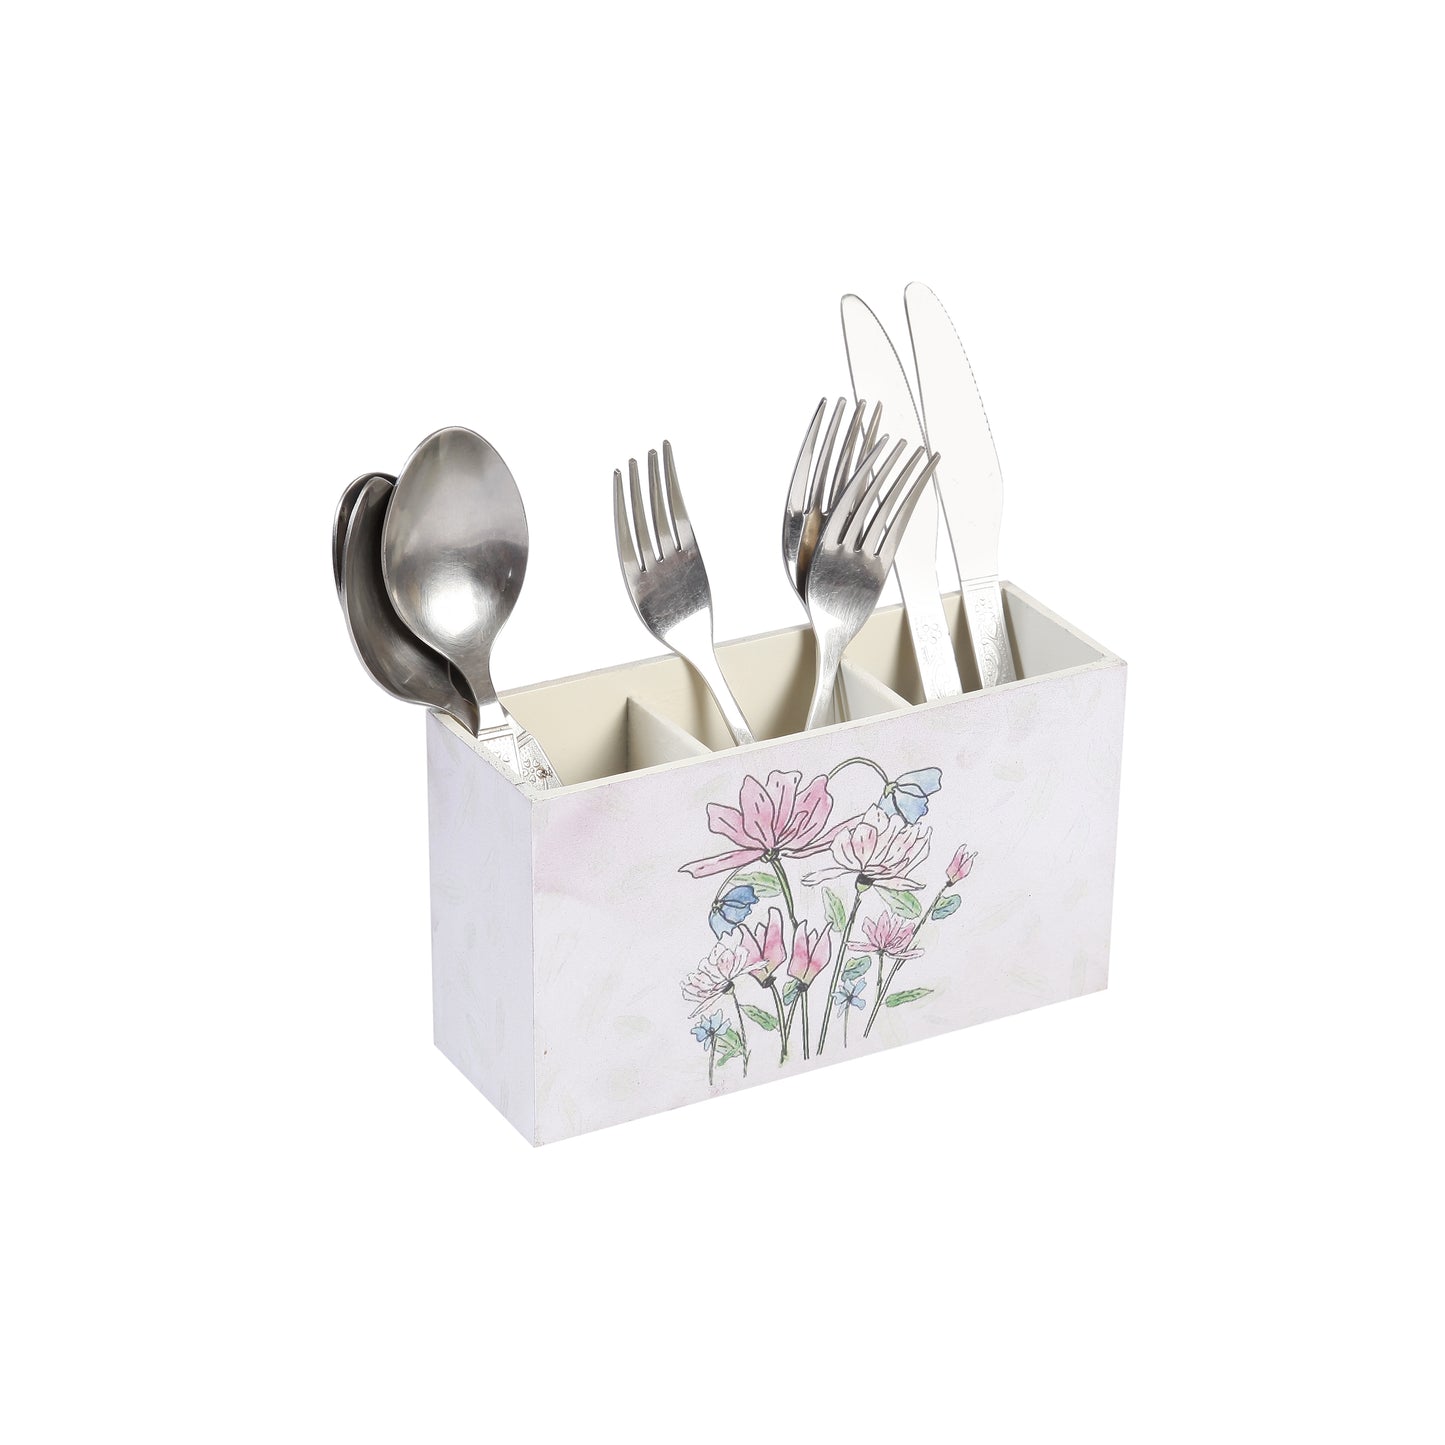 A Tiny Mistake Daisies Wooden Cutlery Holder, 18 x 10 x 6.5 cm